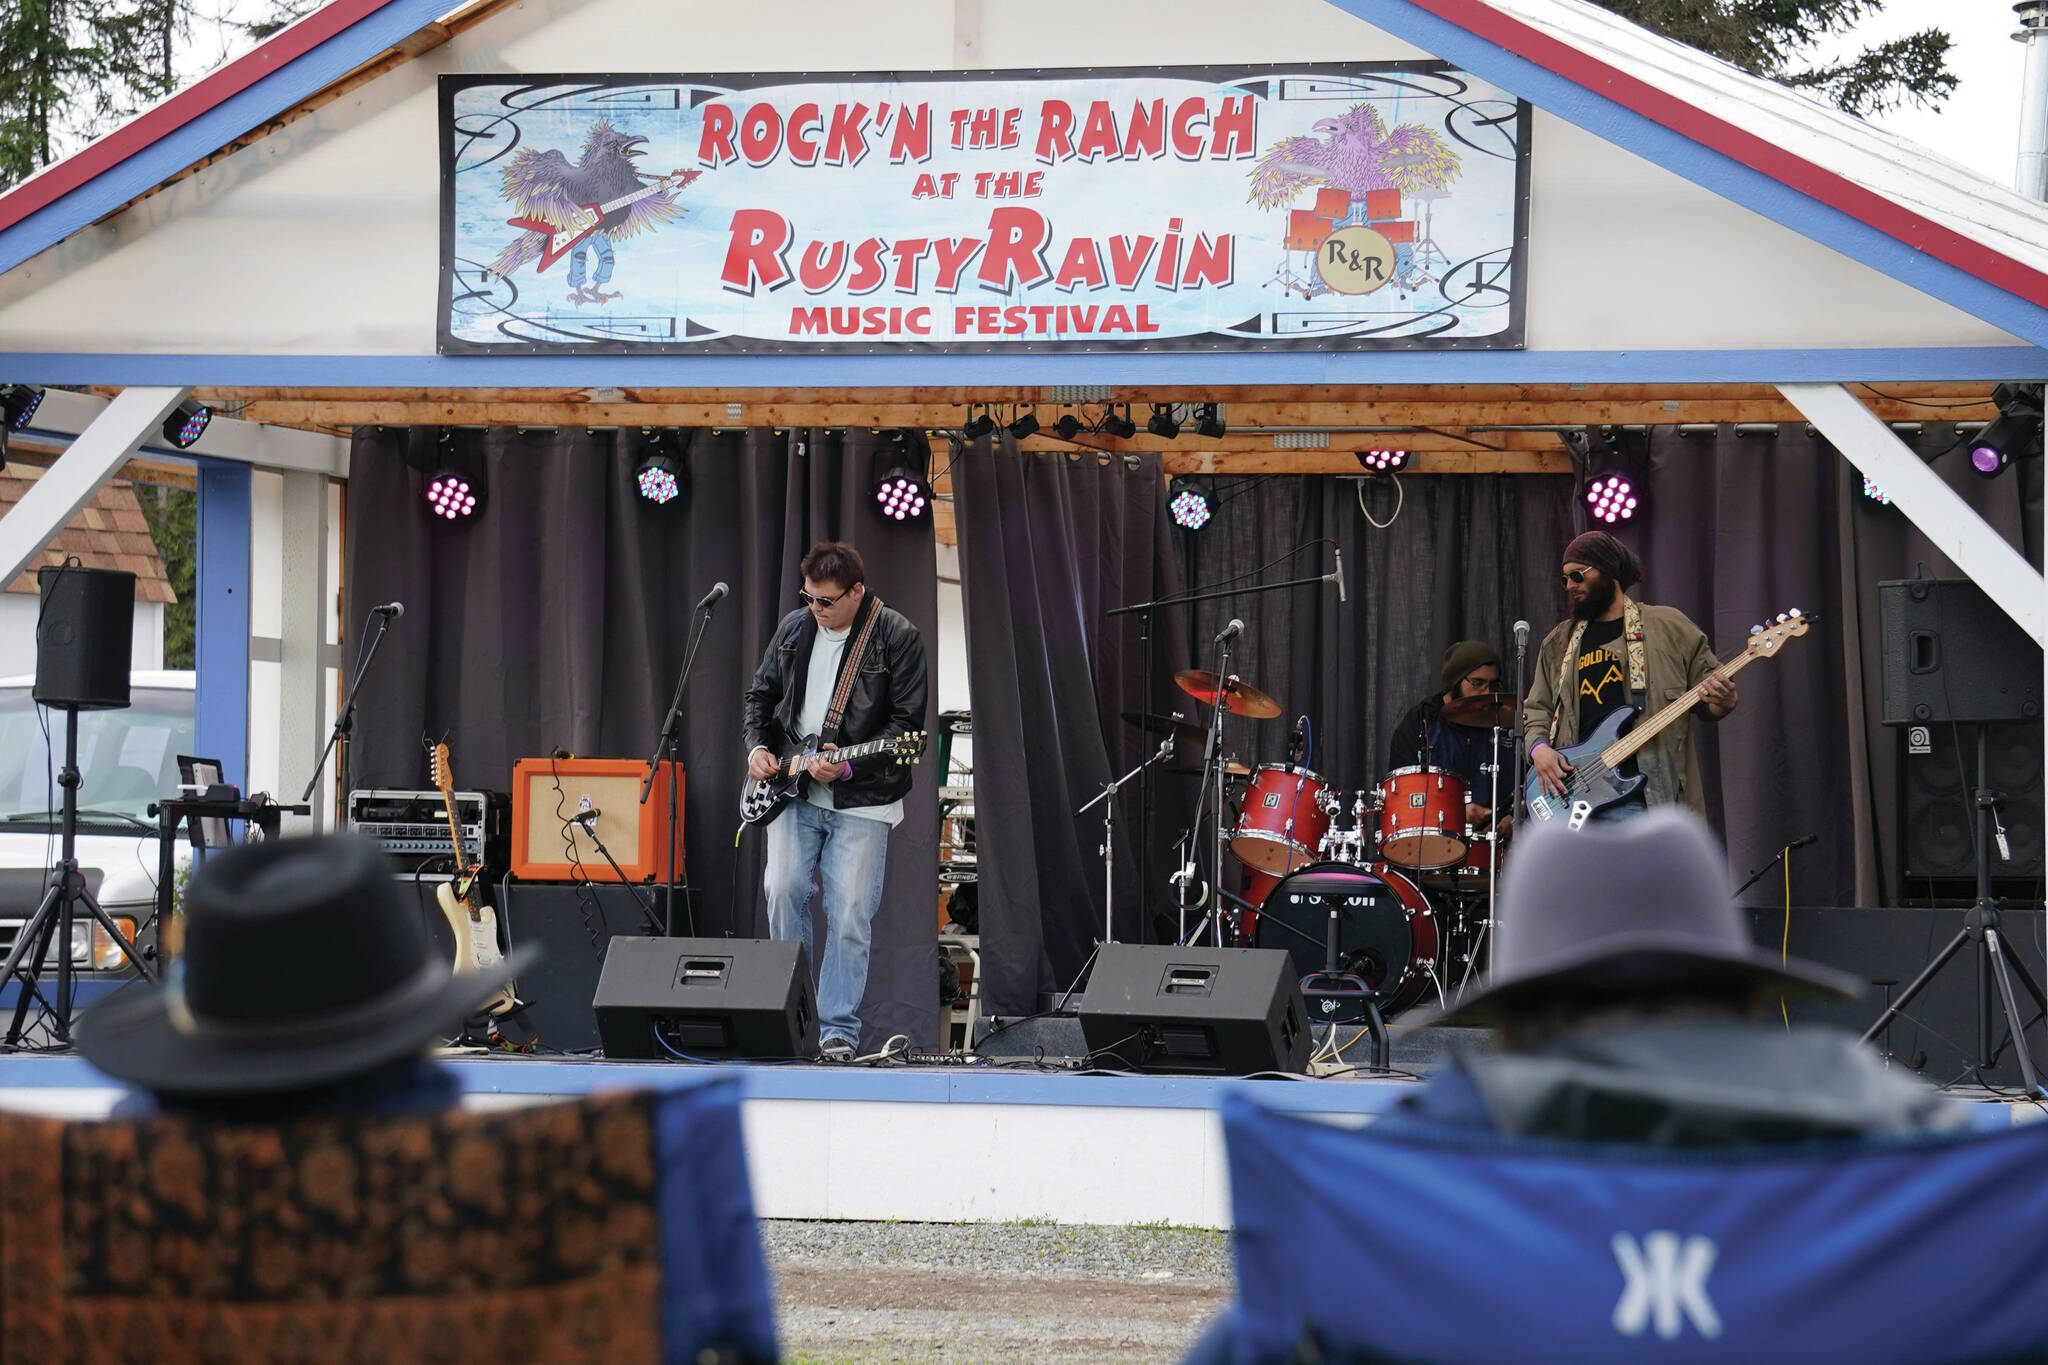 Gold Peak play the opening set of the Seventh Annual Rock’N the Ranch at the Rusty Ravin on Friday, July 7, 2023, at Rusty Ravin Plant Ranch in Kenai, Alaska. (Jake Dye/Peninsula Clarion)
Gold Peak play the opening set of the Seventh Annual Rock’N the Ranch at the Rusty Ravin on Friday, July 7, 2023, at Rusty Ravin Plant Ranch in Kenai. (Jake Dye/Peninsula Clarion)